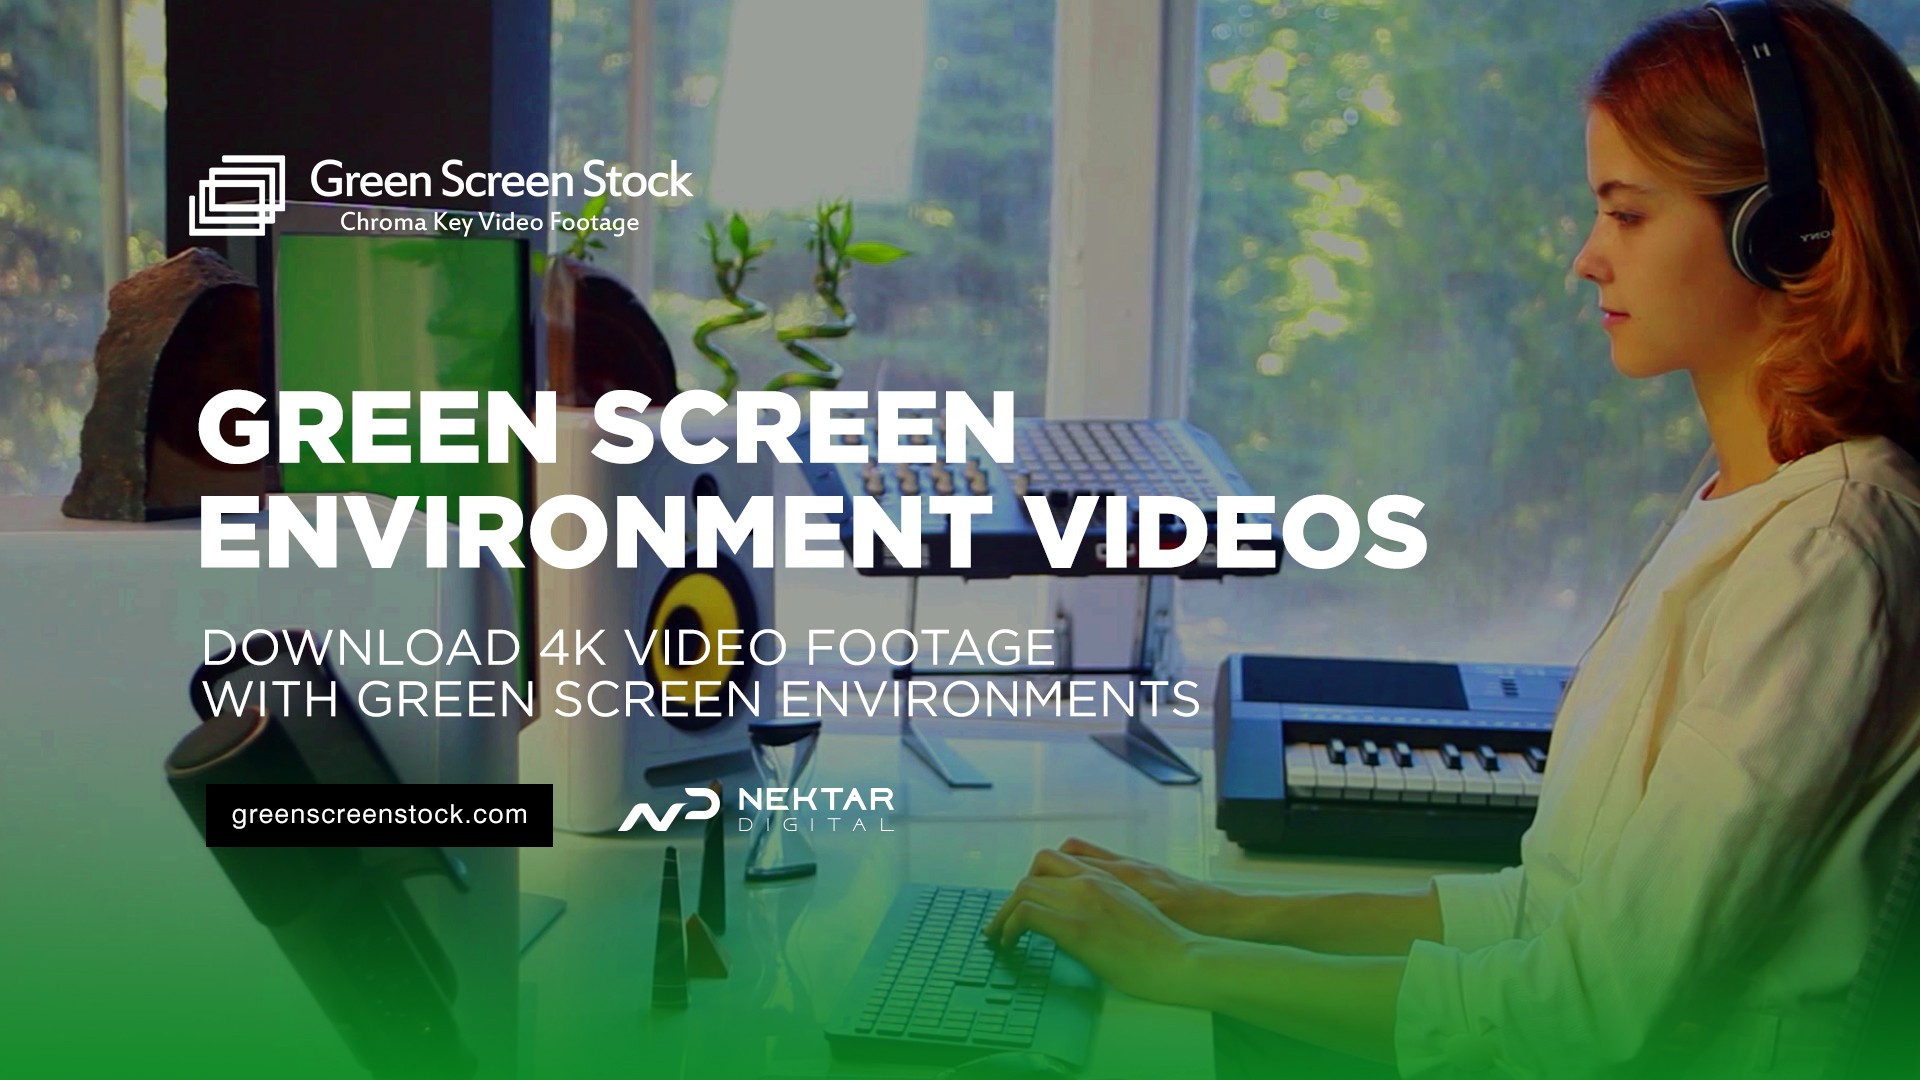 does davinci resolve support green screen effects